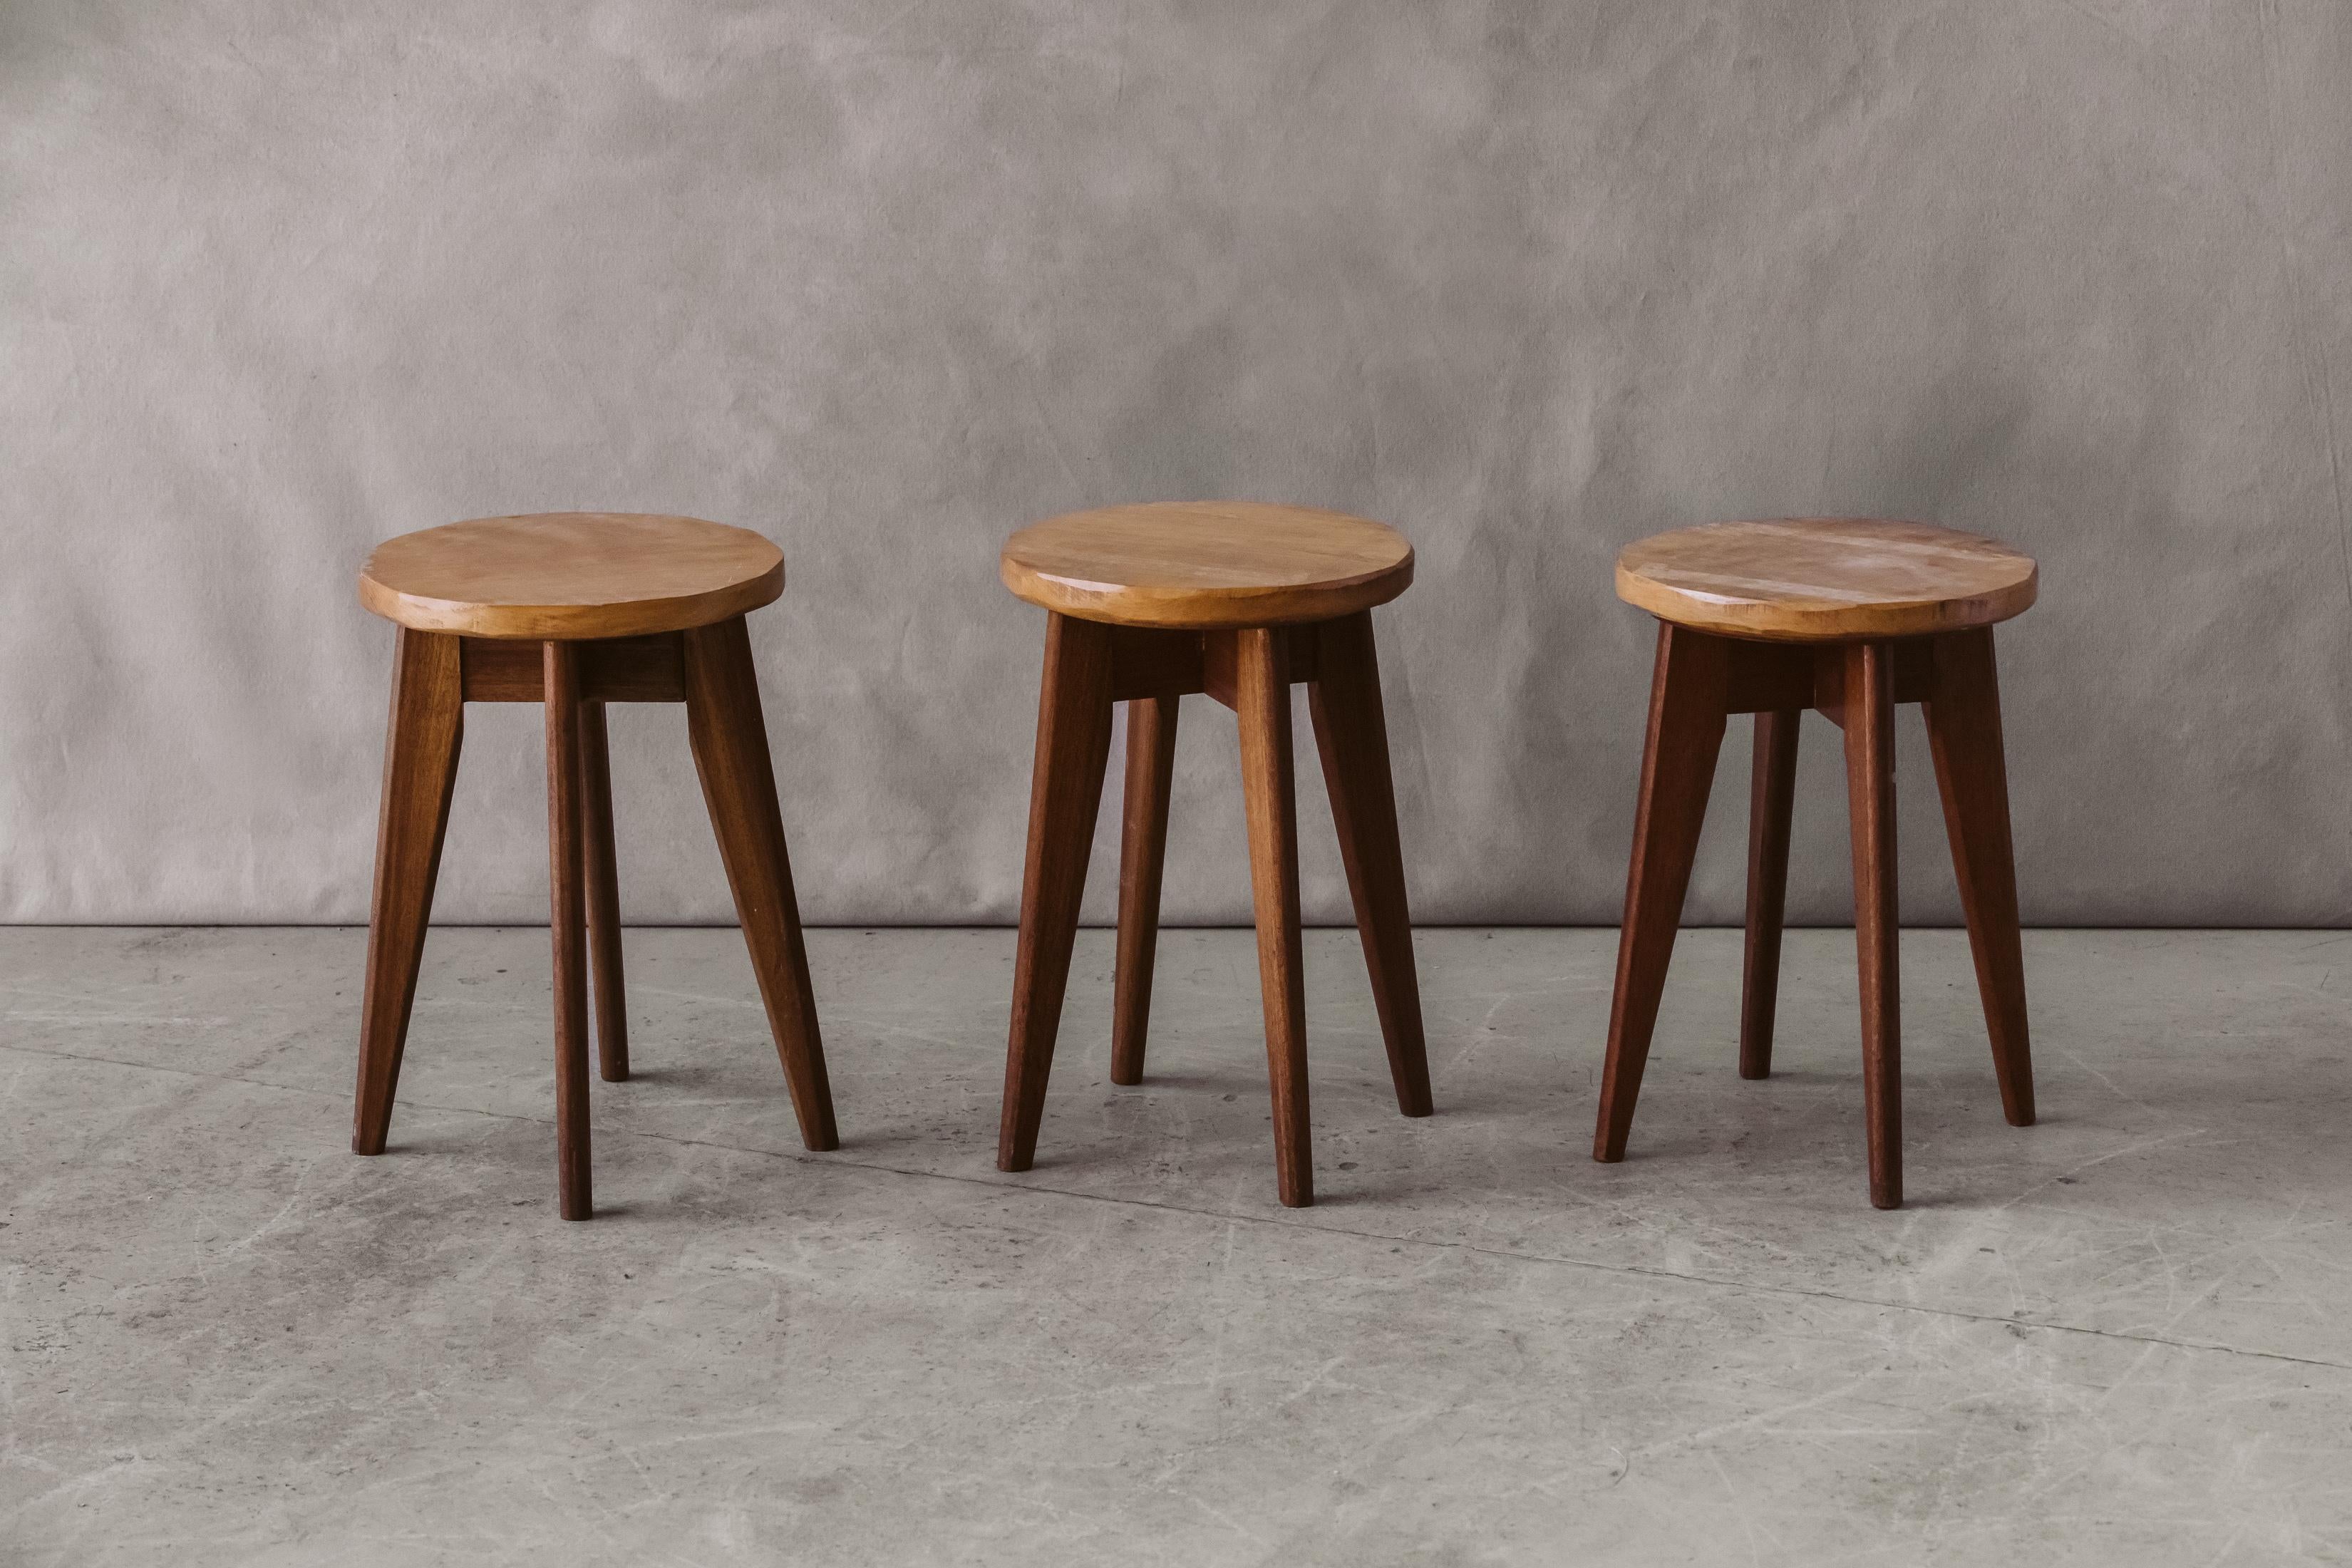 Vintage set of three stools from France, circa 1960. Solid oak design with light wear and use.

We don't have the time to write an extensive description on each of our pieces. We prefer to speak directly with our clients.  So, If you have any